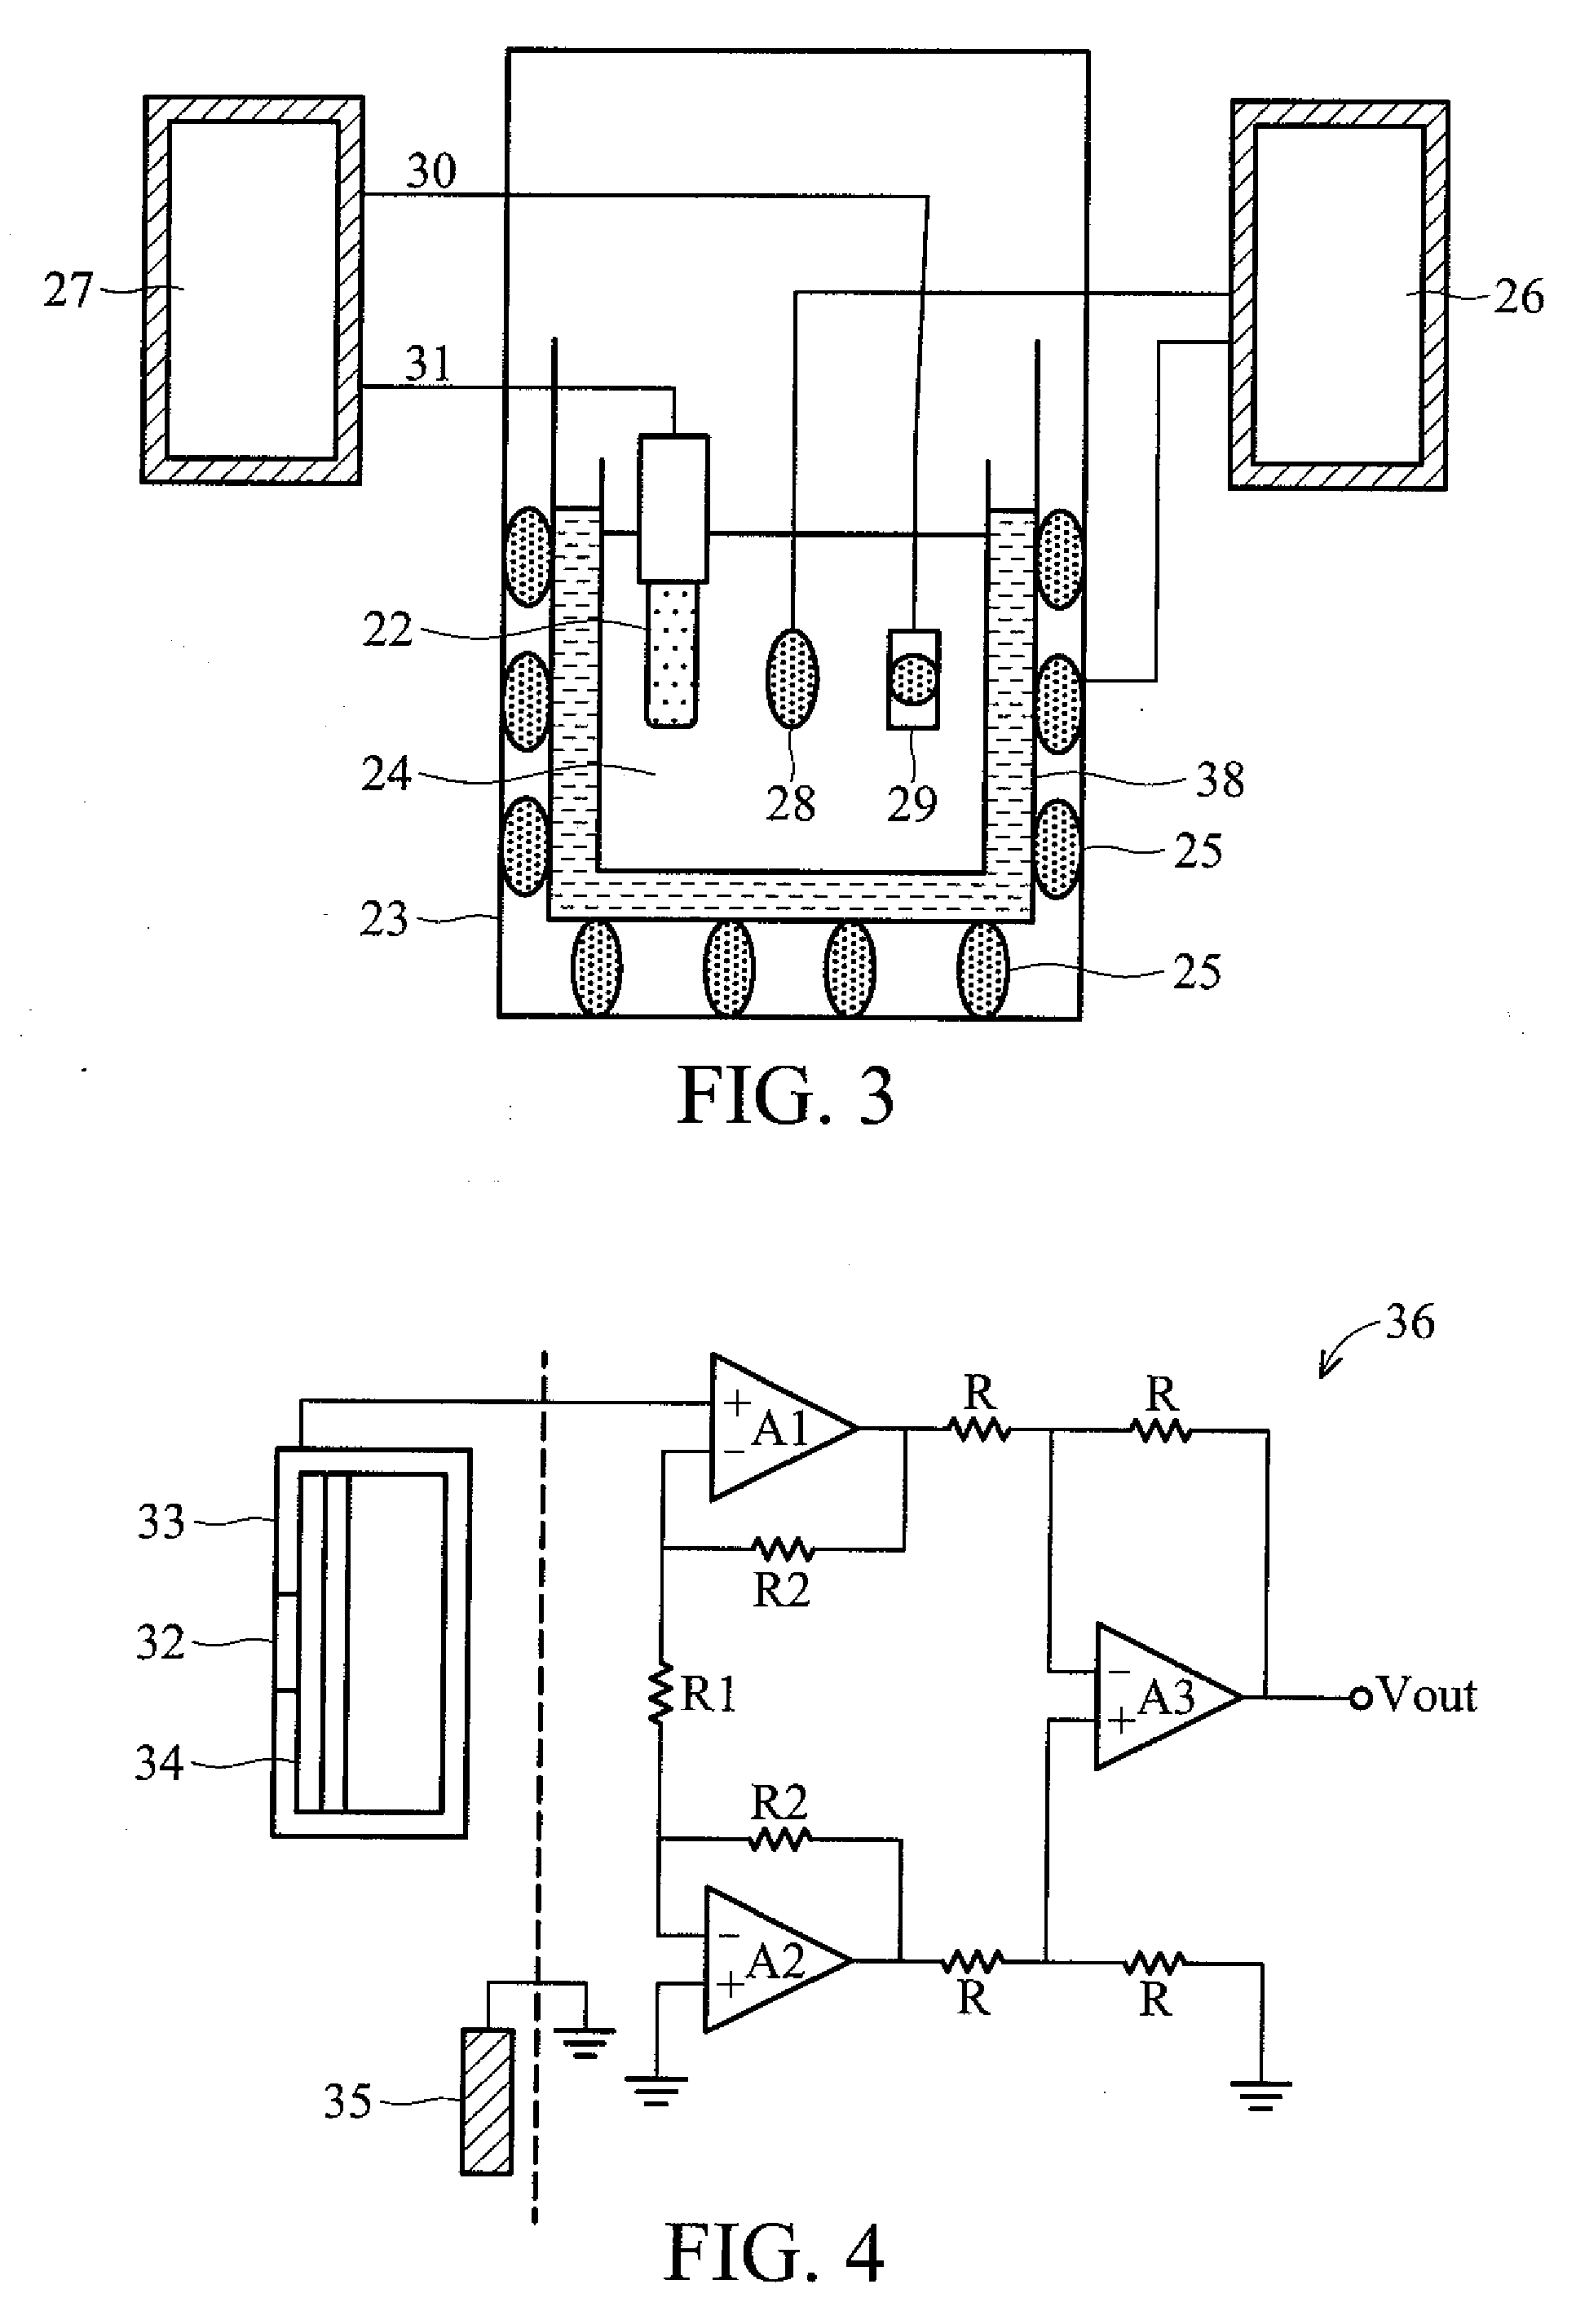 Penicillin g biosensor, systems comprising the same, and measurement using the systems